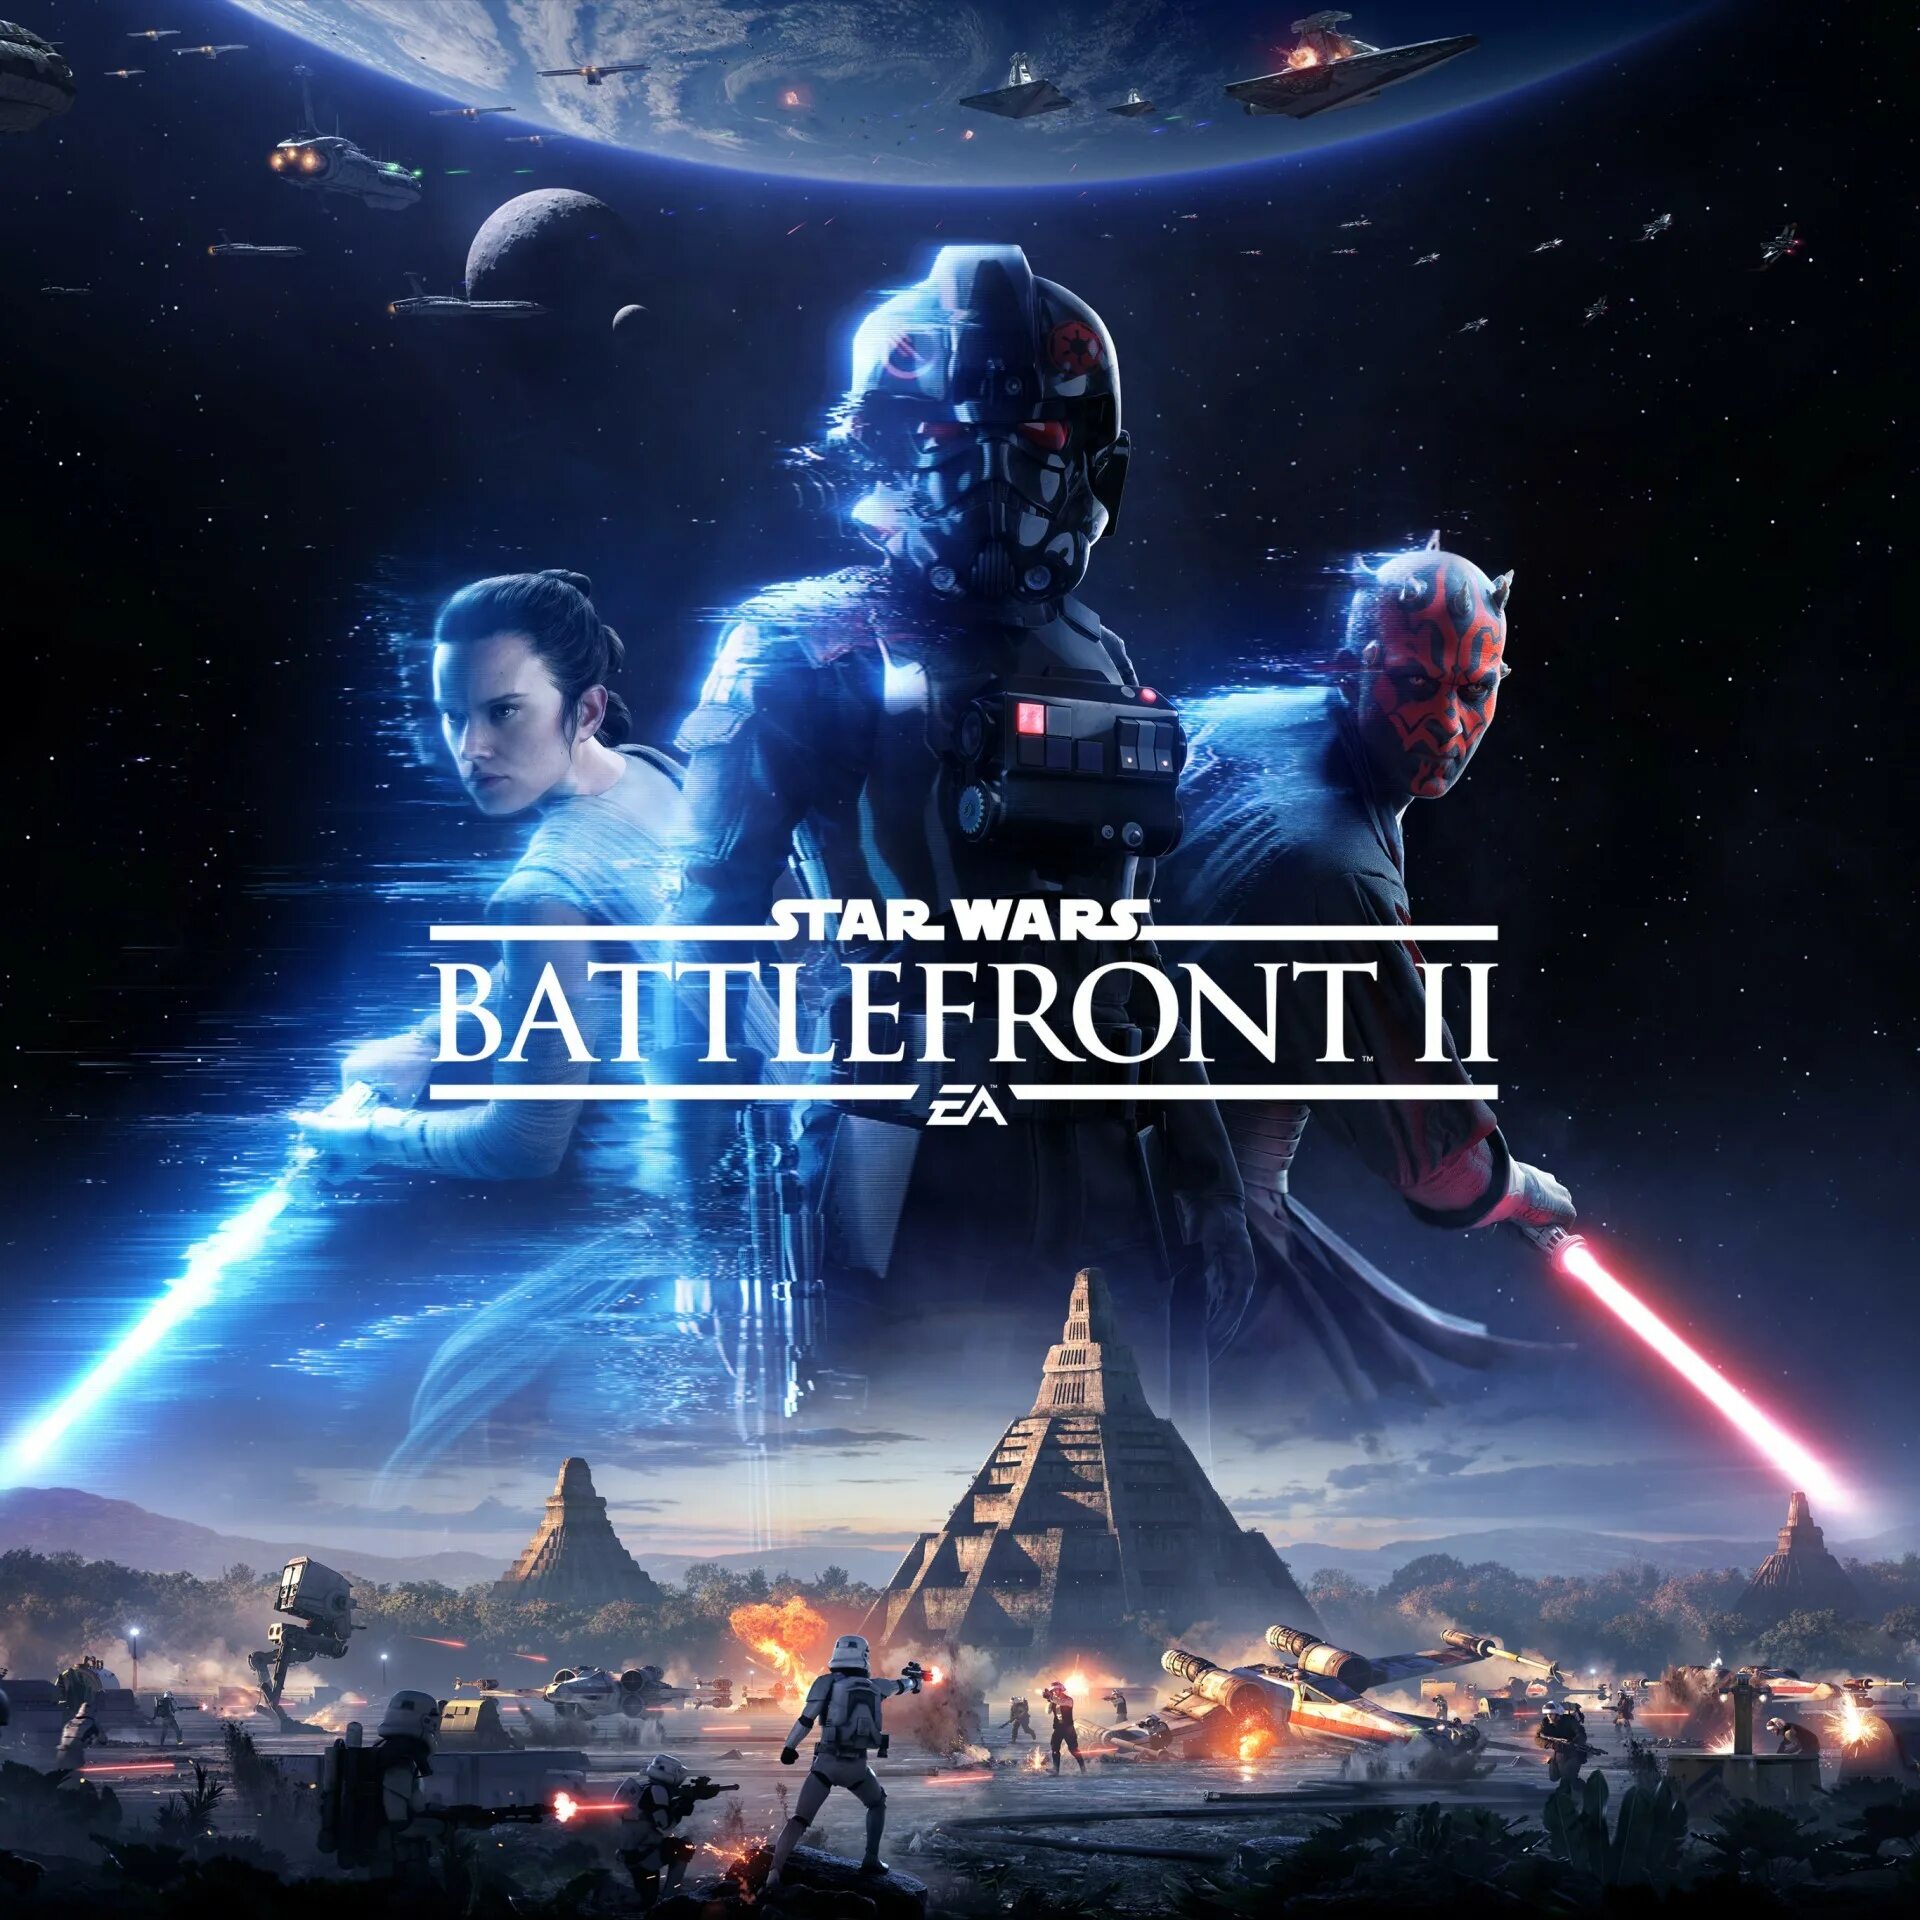 Star wars battlefront classic collection nintendo switch. Star Wars™ Battlefront™ II. Battlefront 2 диск. Star Wars Battlefront 2 ps4. Star Wars Battlefront II обложка.